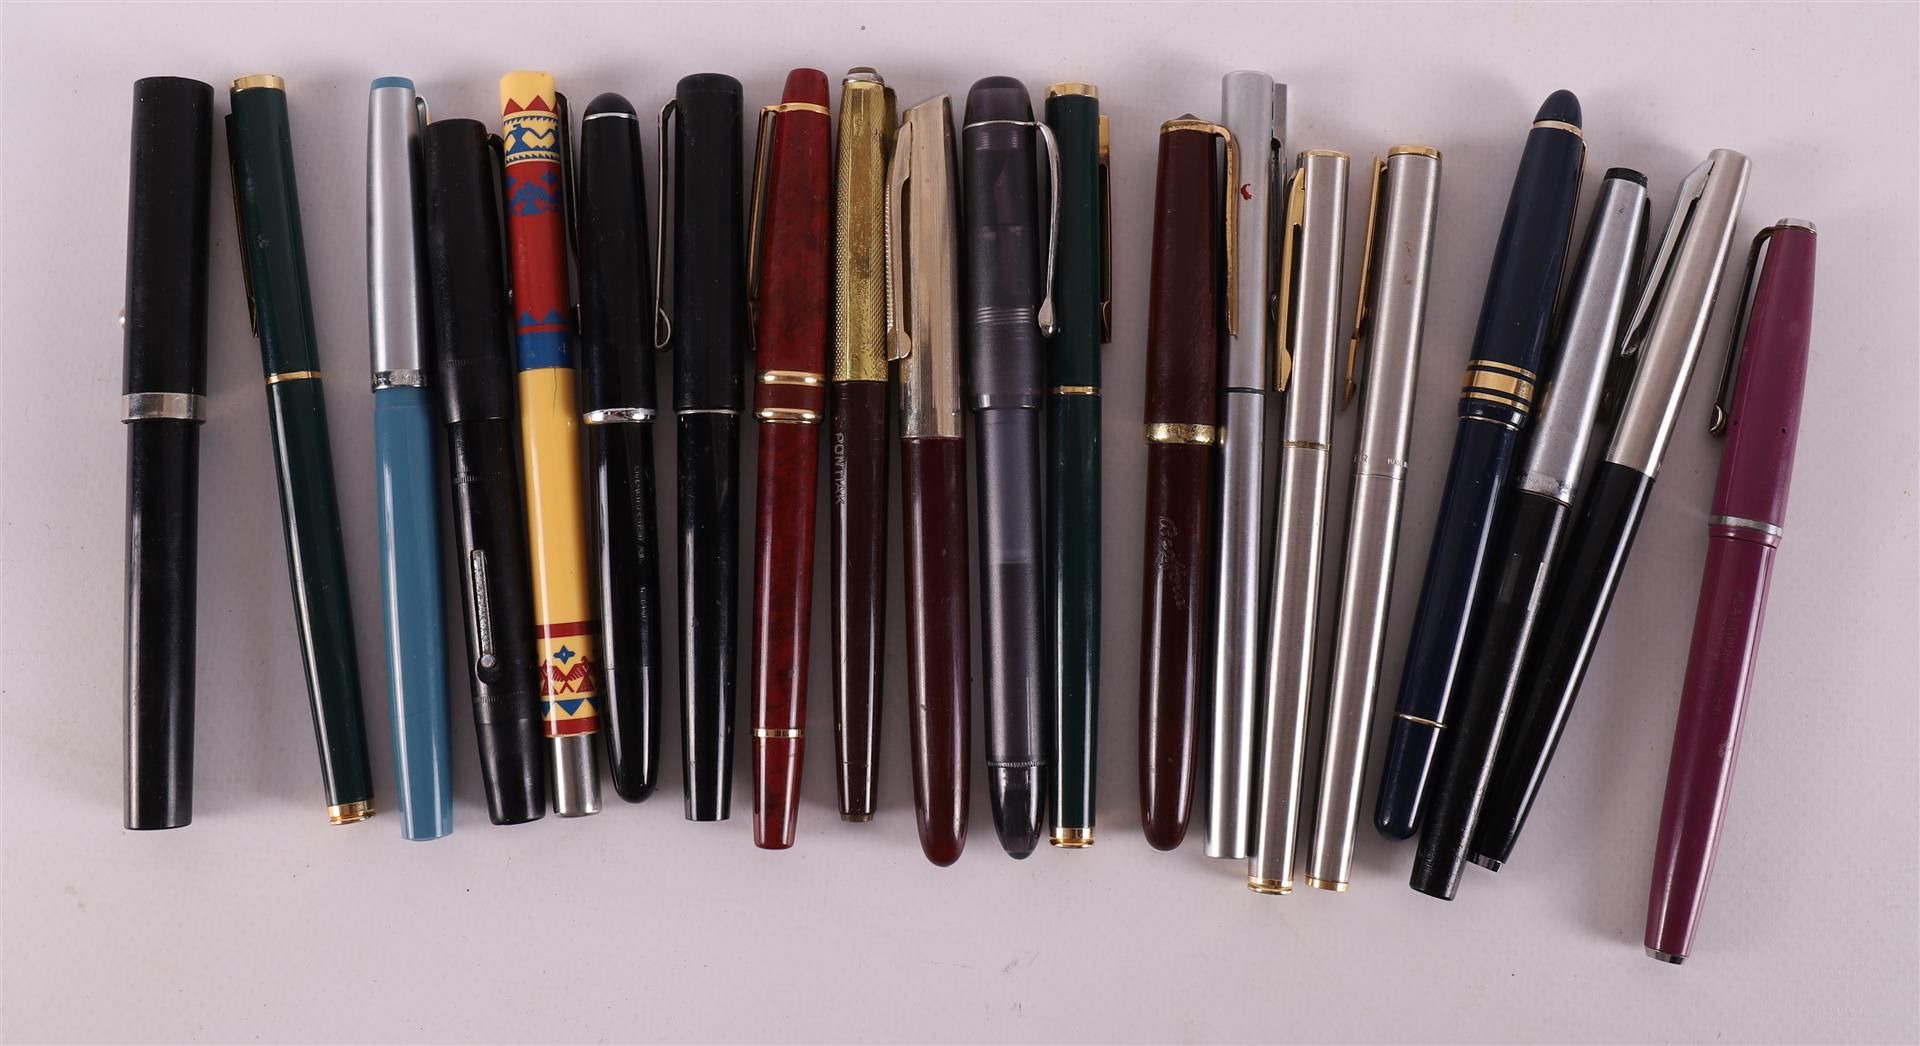 A lot of various fountain pens, including Parker and Shaeffer.